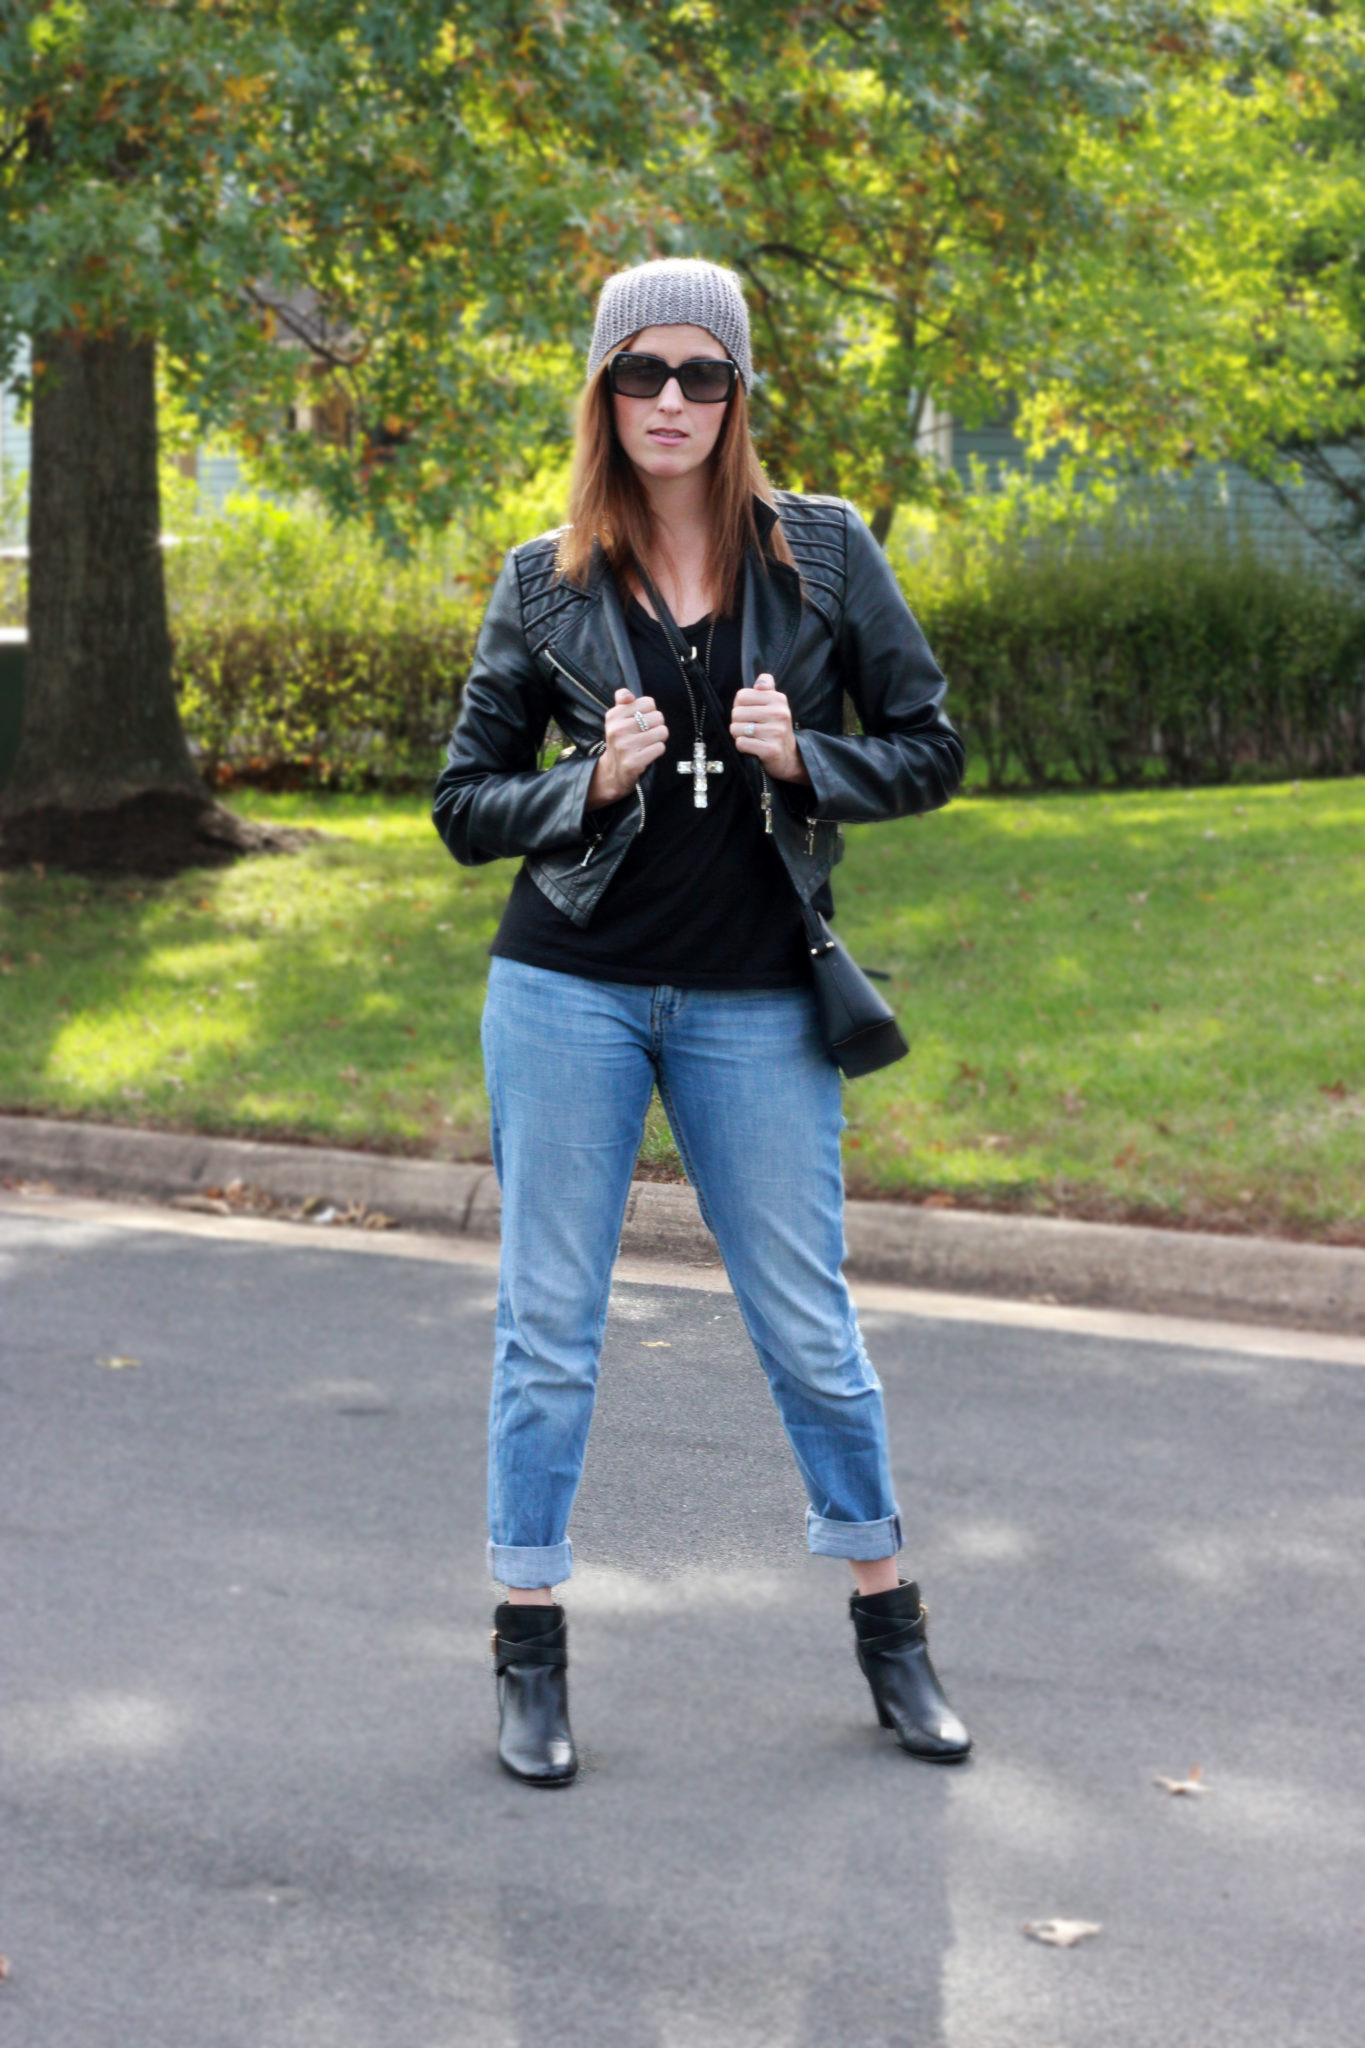 Stylish Saturday: Leather And Jeans